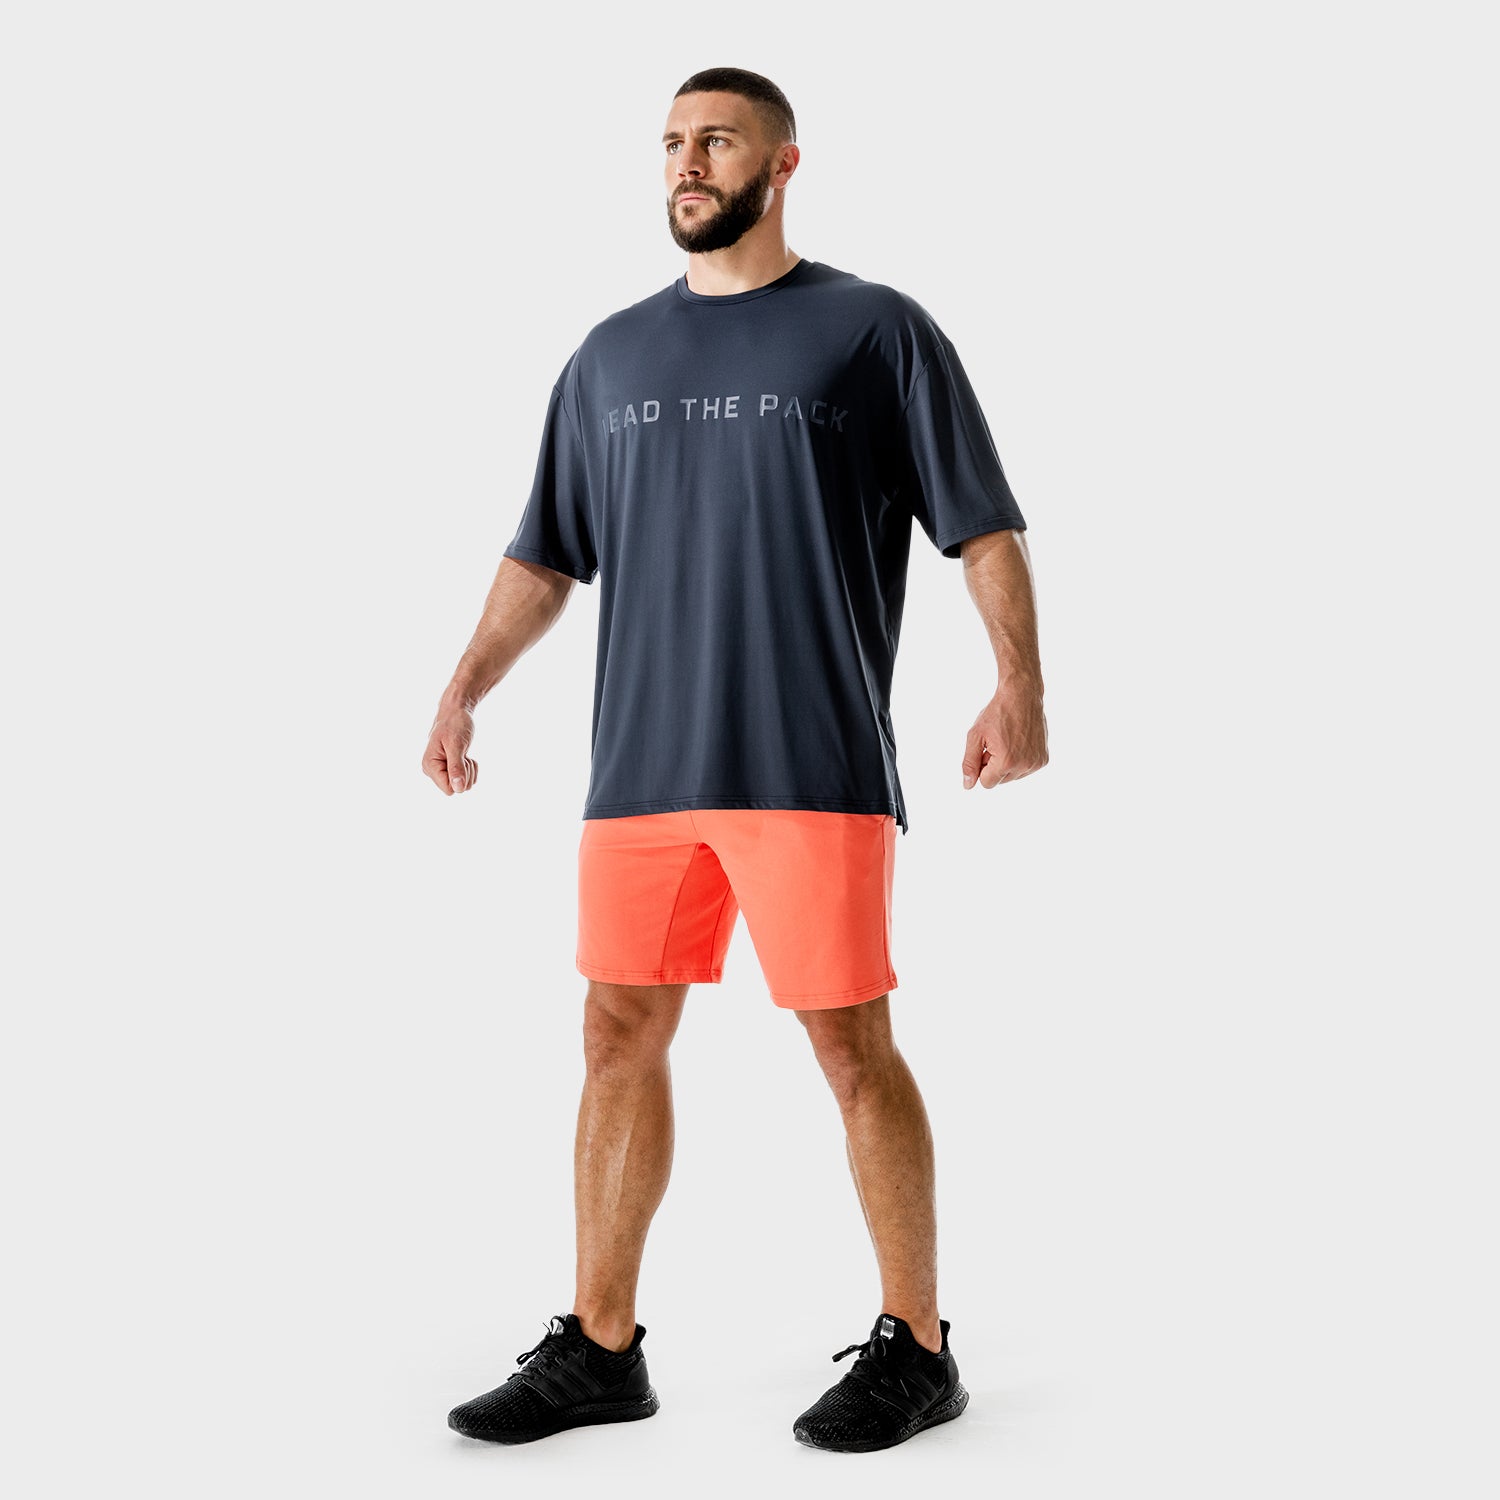 squatwolf-gym-wear-lab-360-oversized-tee-blue-workout-shirts-for-men